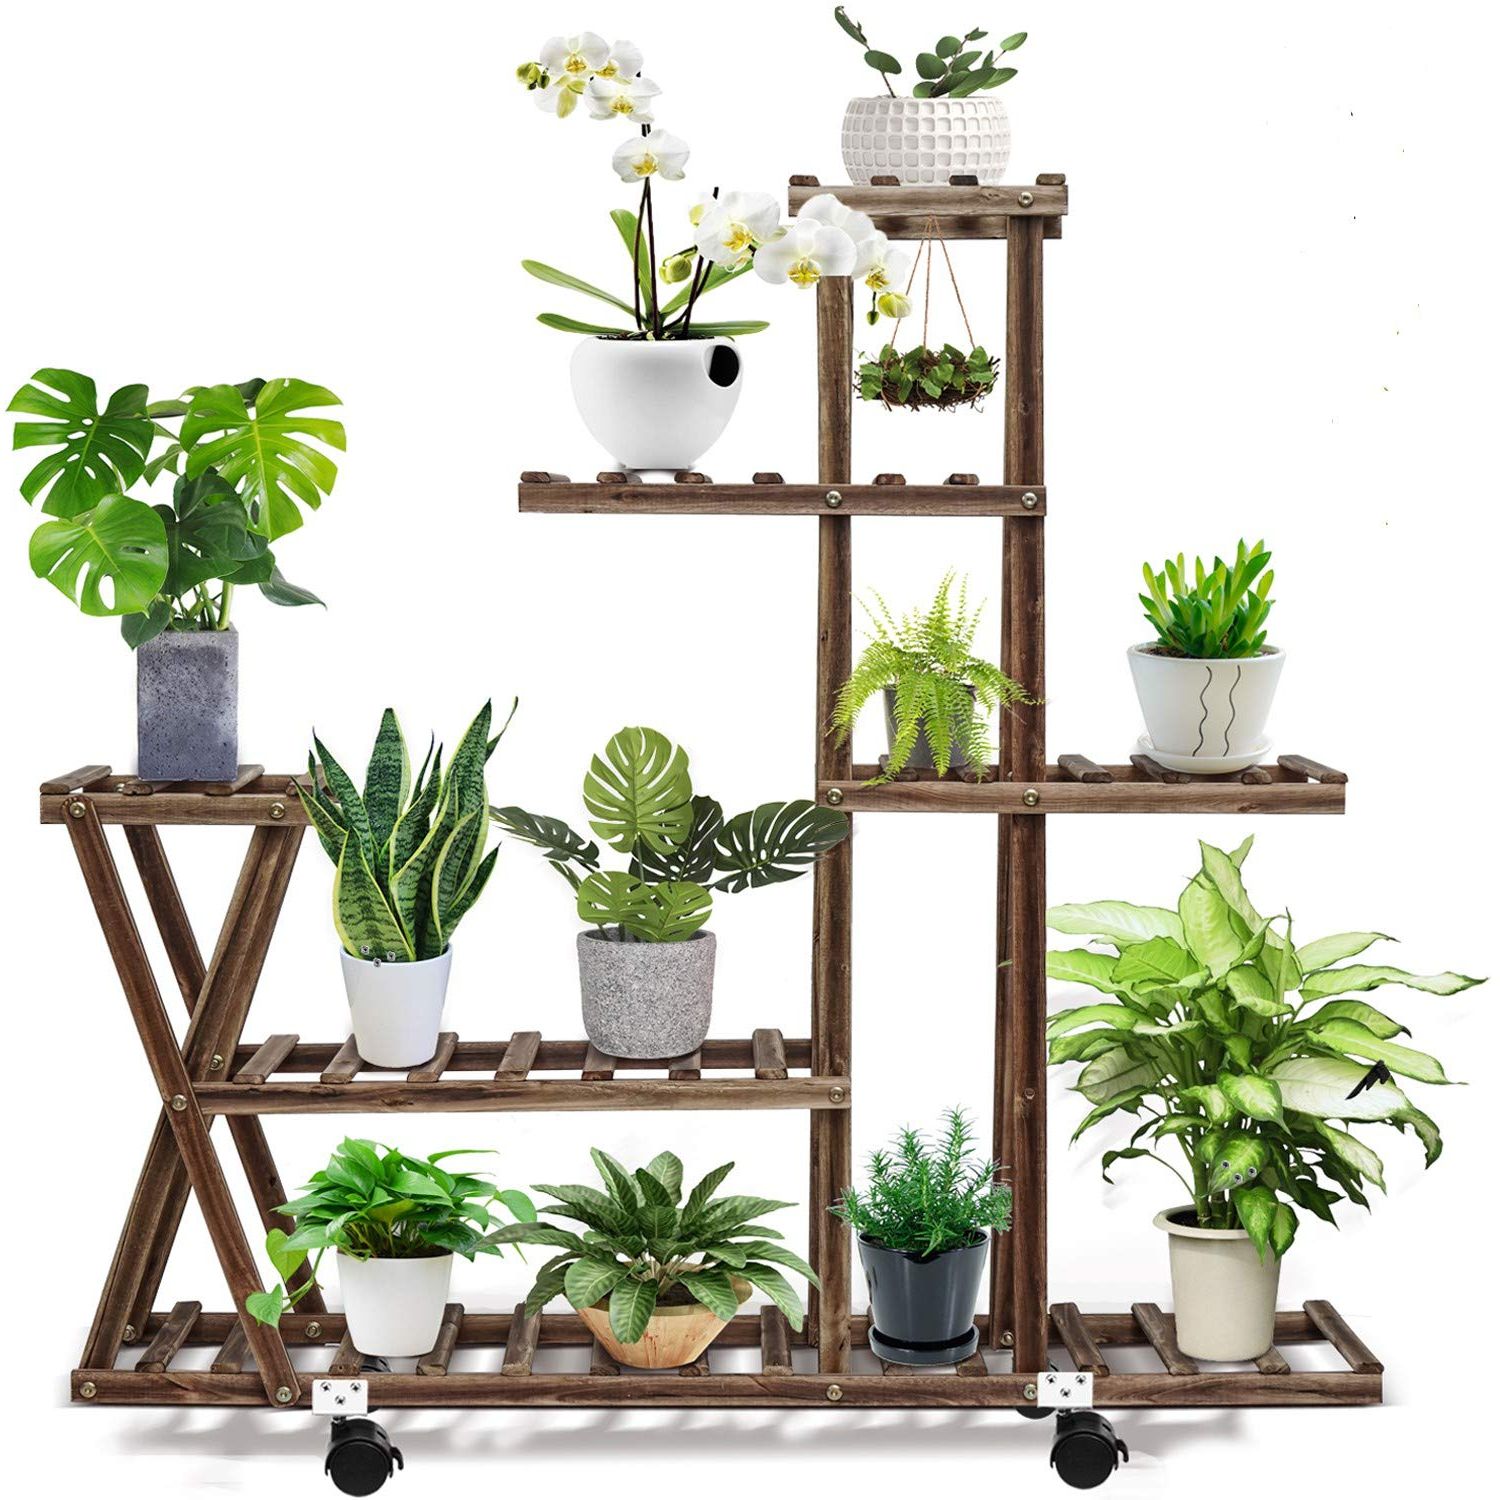 Best And Newest Outdoor Plant Stands Pertaining To Cfmour Wood Plant Stand Indoor Outdoor, Plant Display Multi Tier Flower  Shelves Stands, Garden Plant Shelf Rack Holder In Corner Living Room  Balcony Patio Yard With 3 Free Gardening Tools (View 14 of 15)